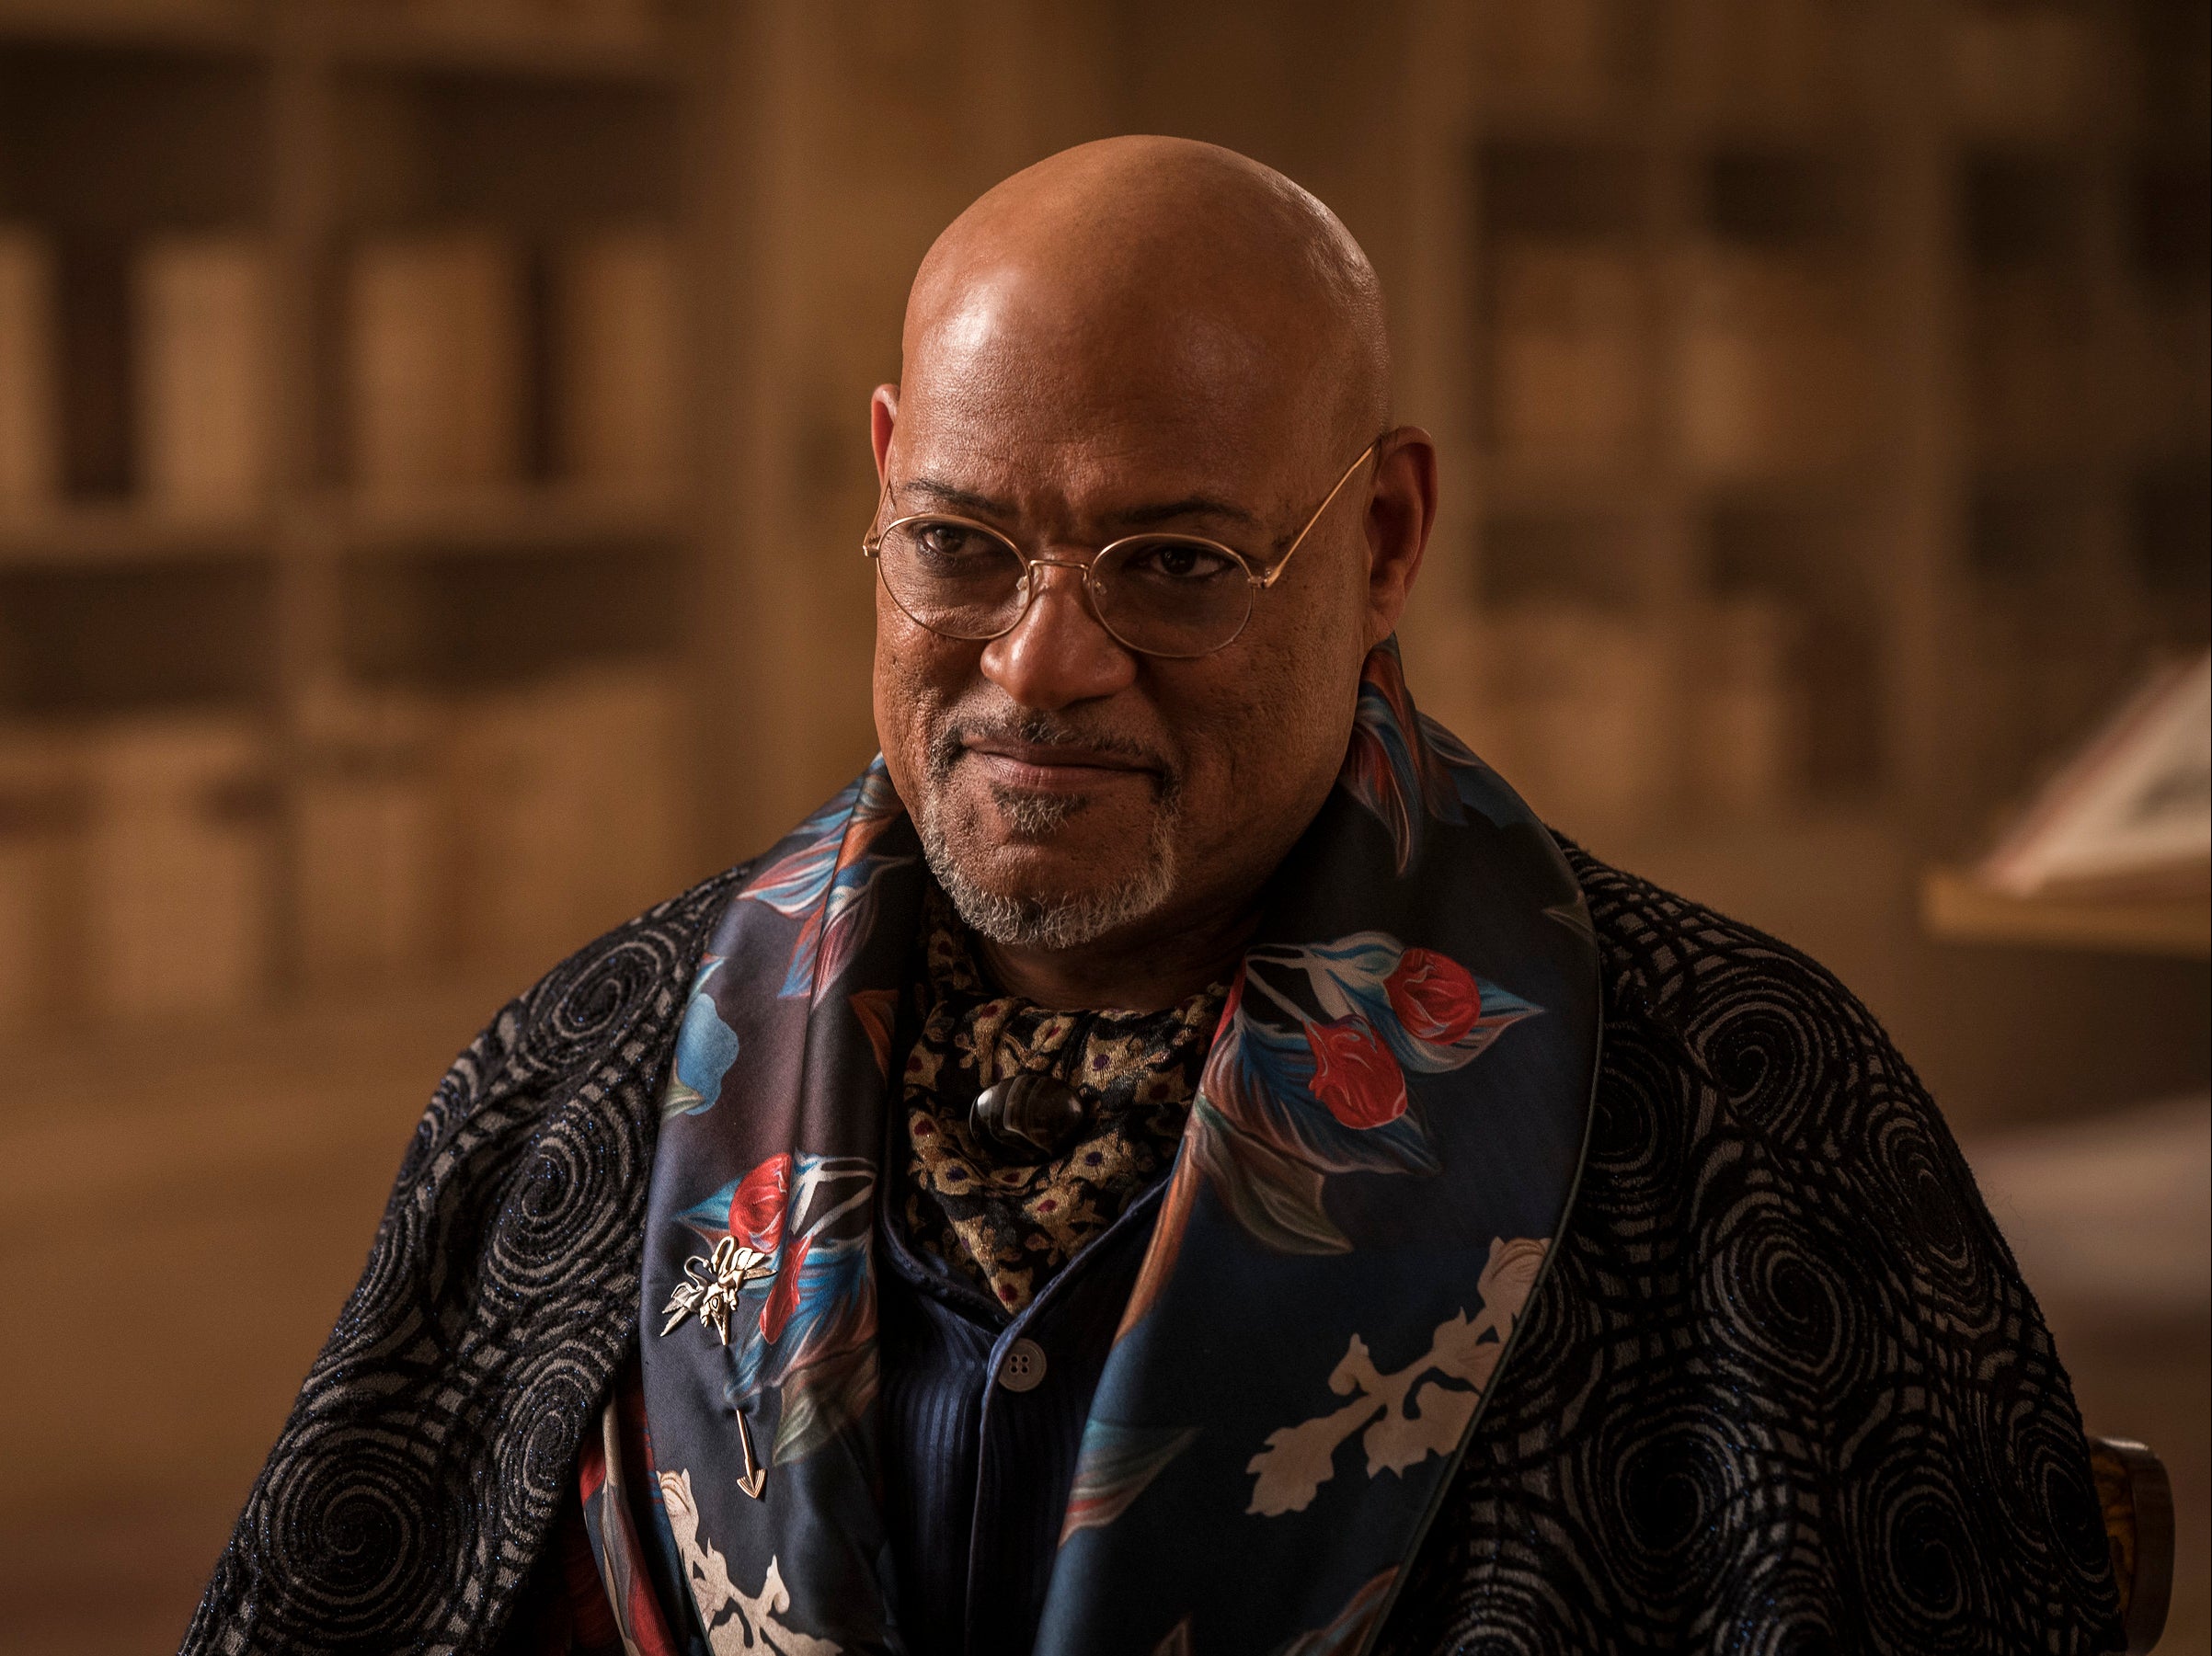 Laurence Fishburne as the enigmatic school master in ‘The School for Good and Evil'